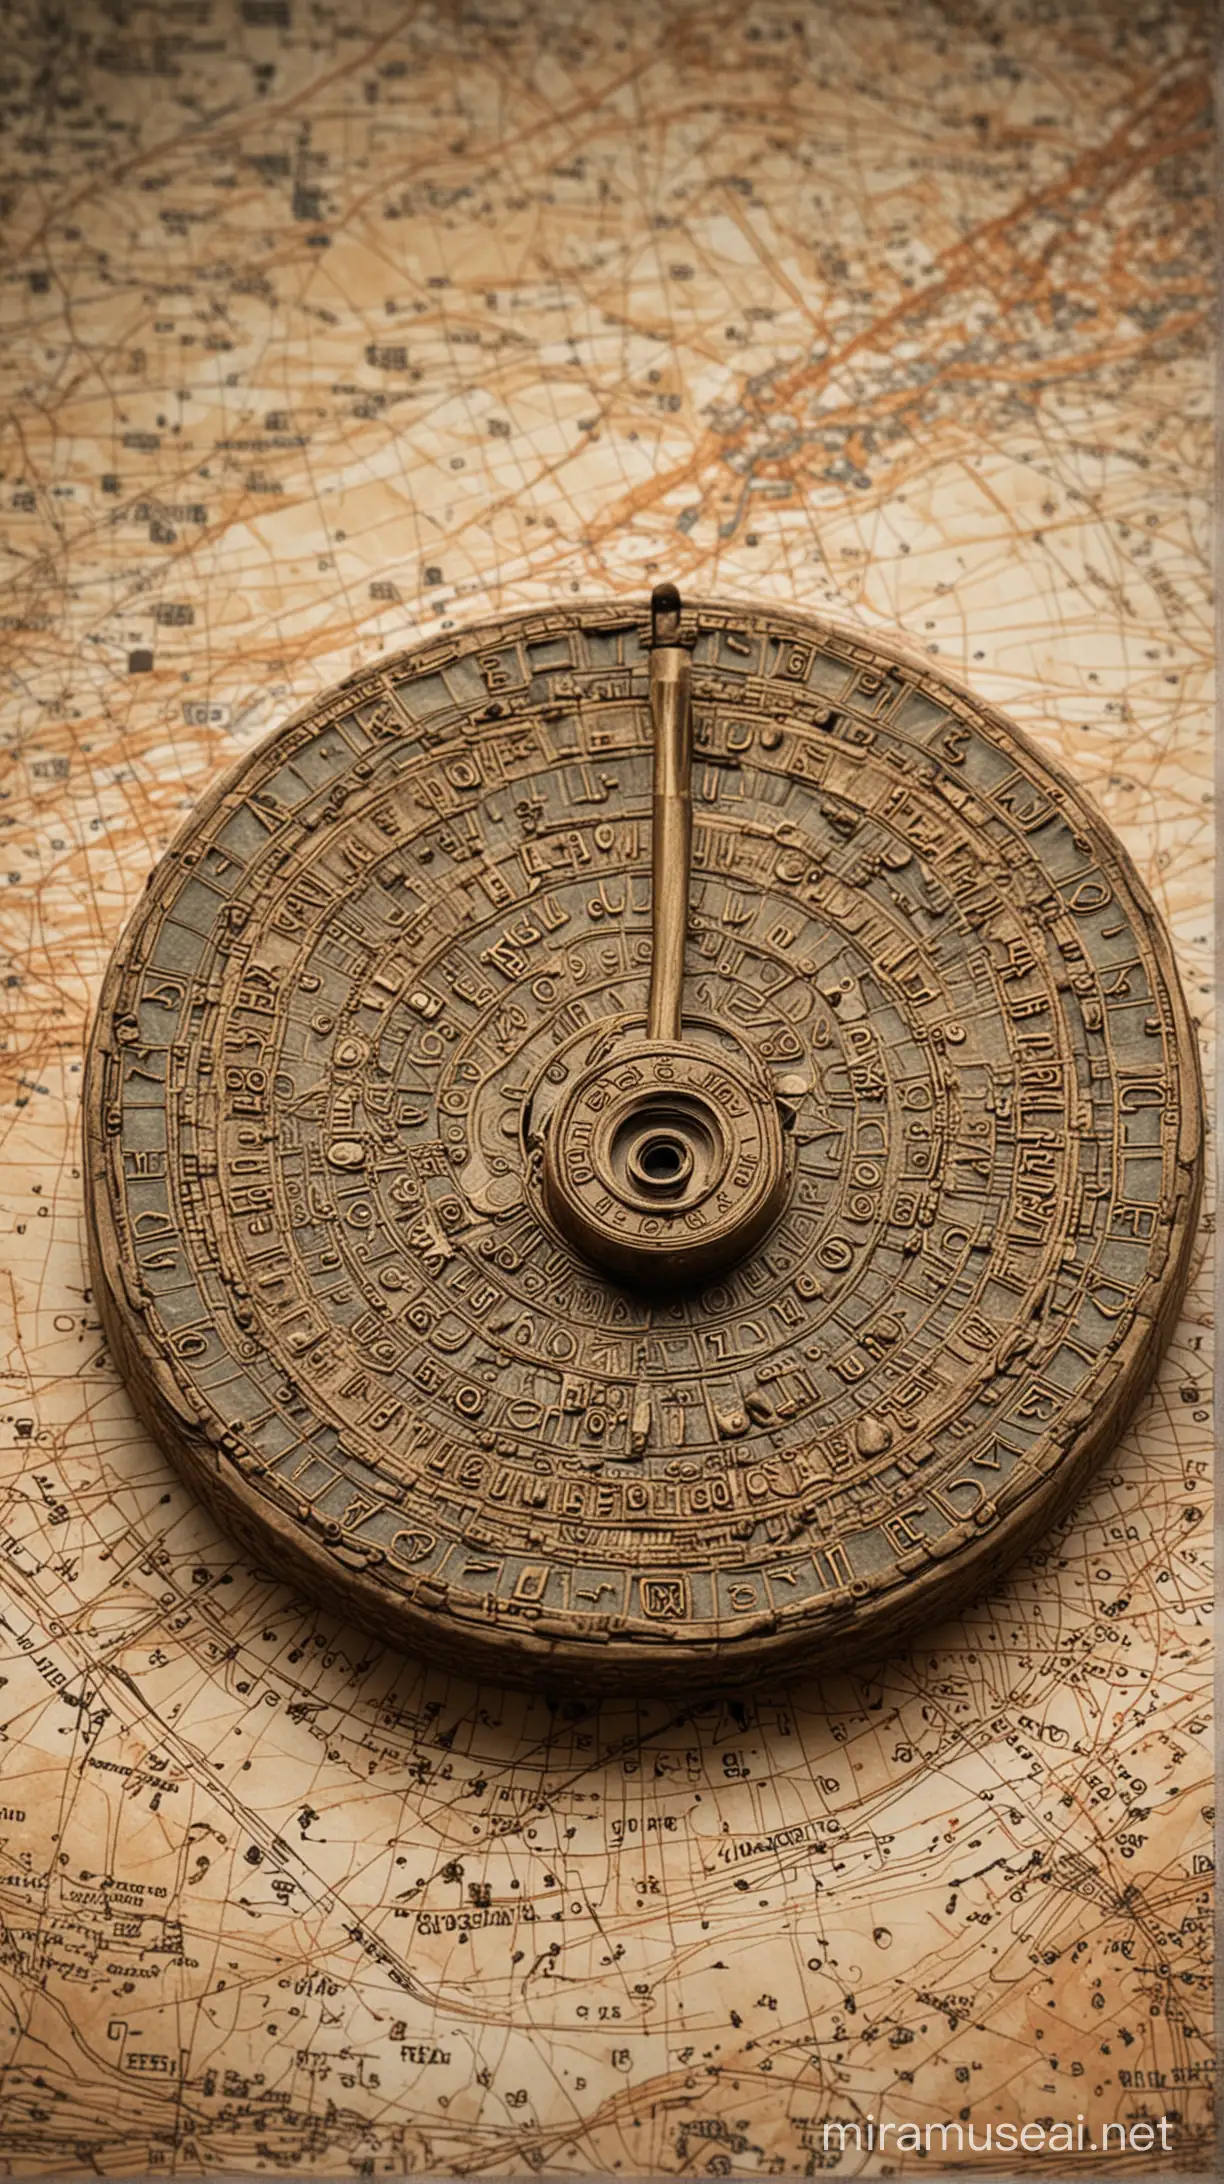 a small ancient metallic bronze decoder-dial disk artifact with four rotating concentric rings, dusty, on a desk covered with oceanic maps and cartographic charts